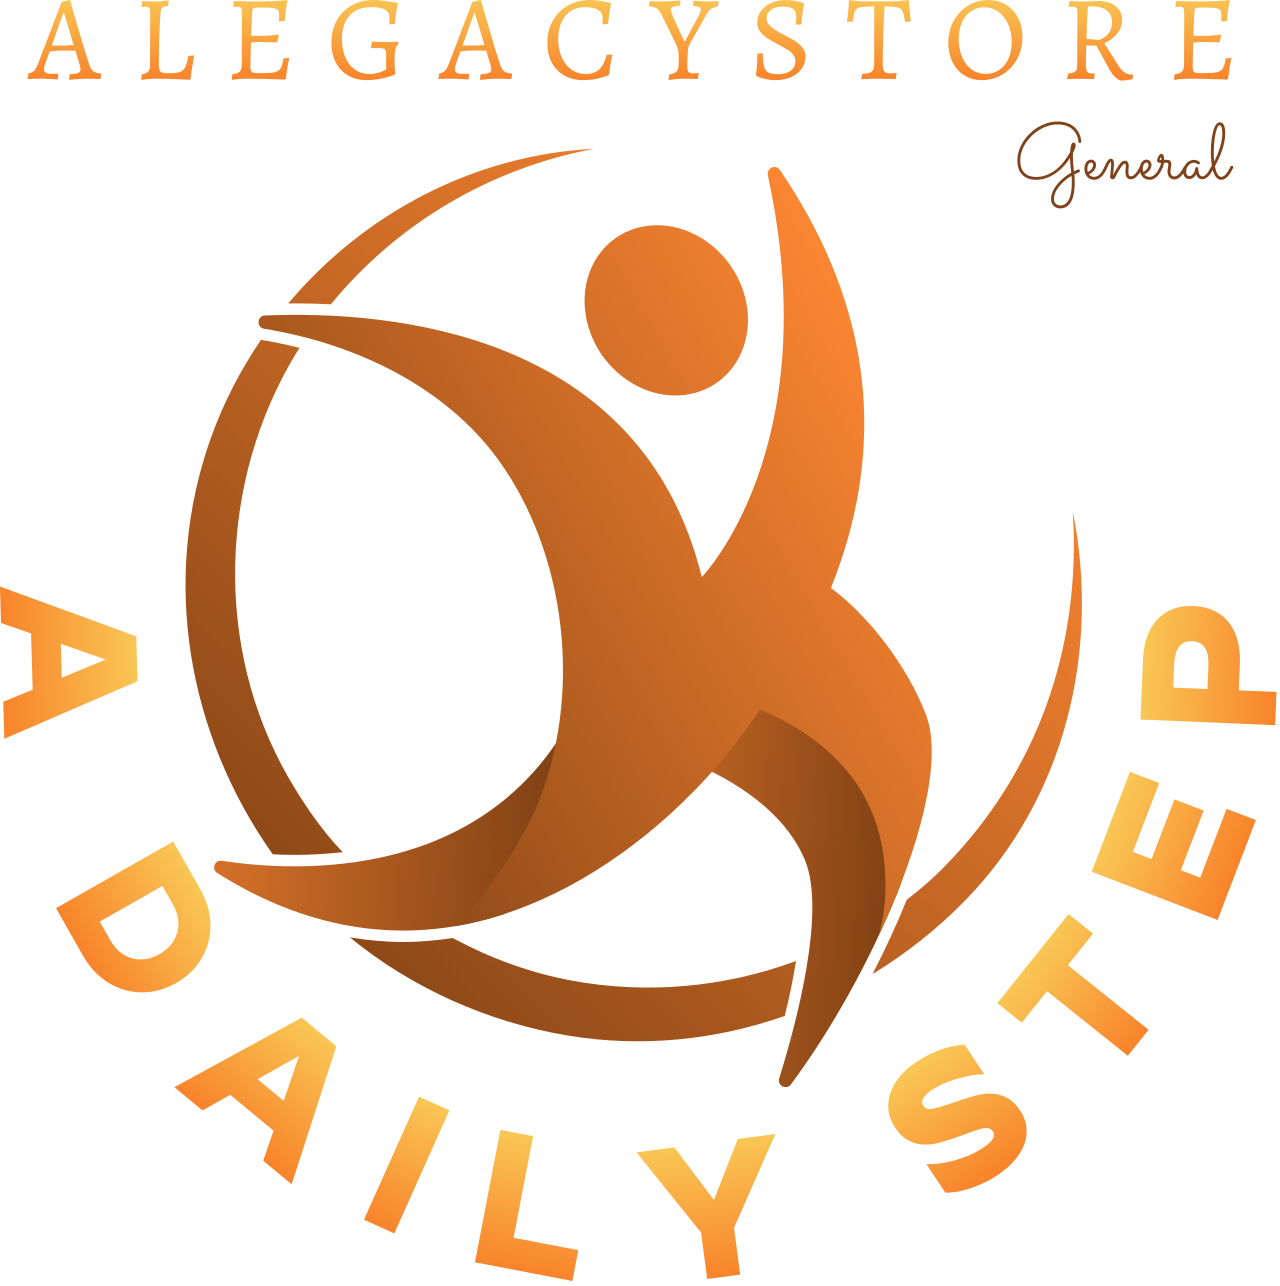 A DAILY STEP's web page